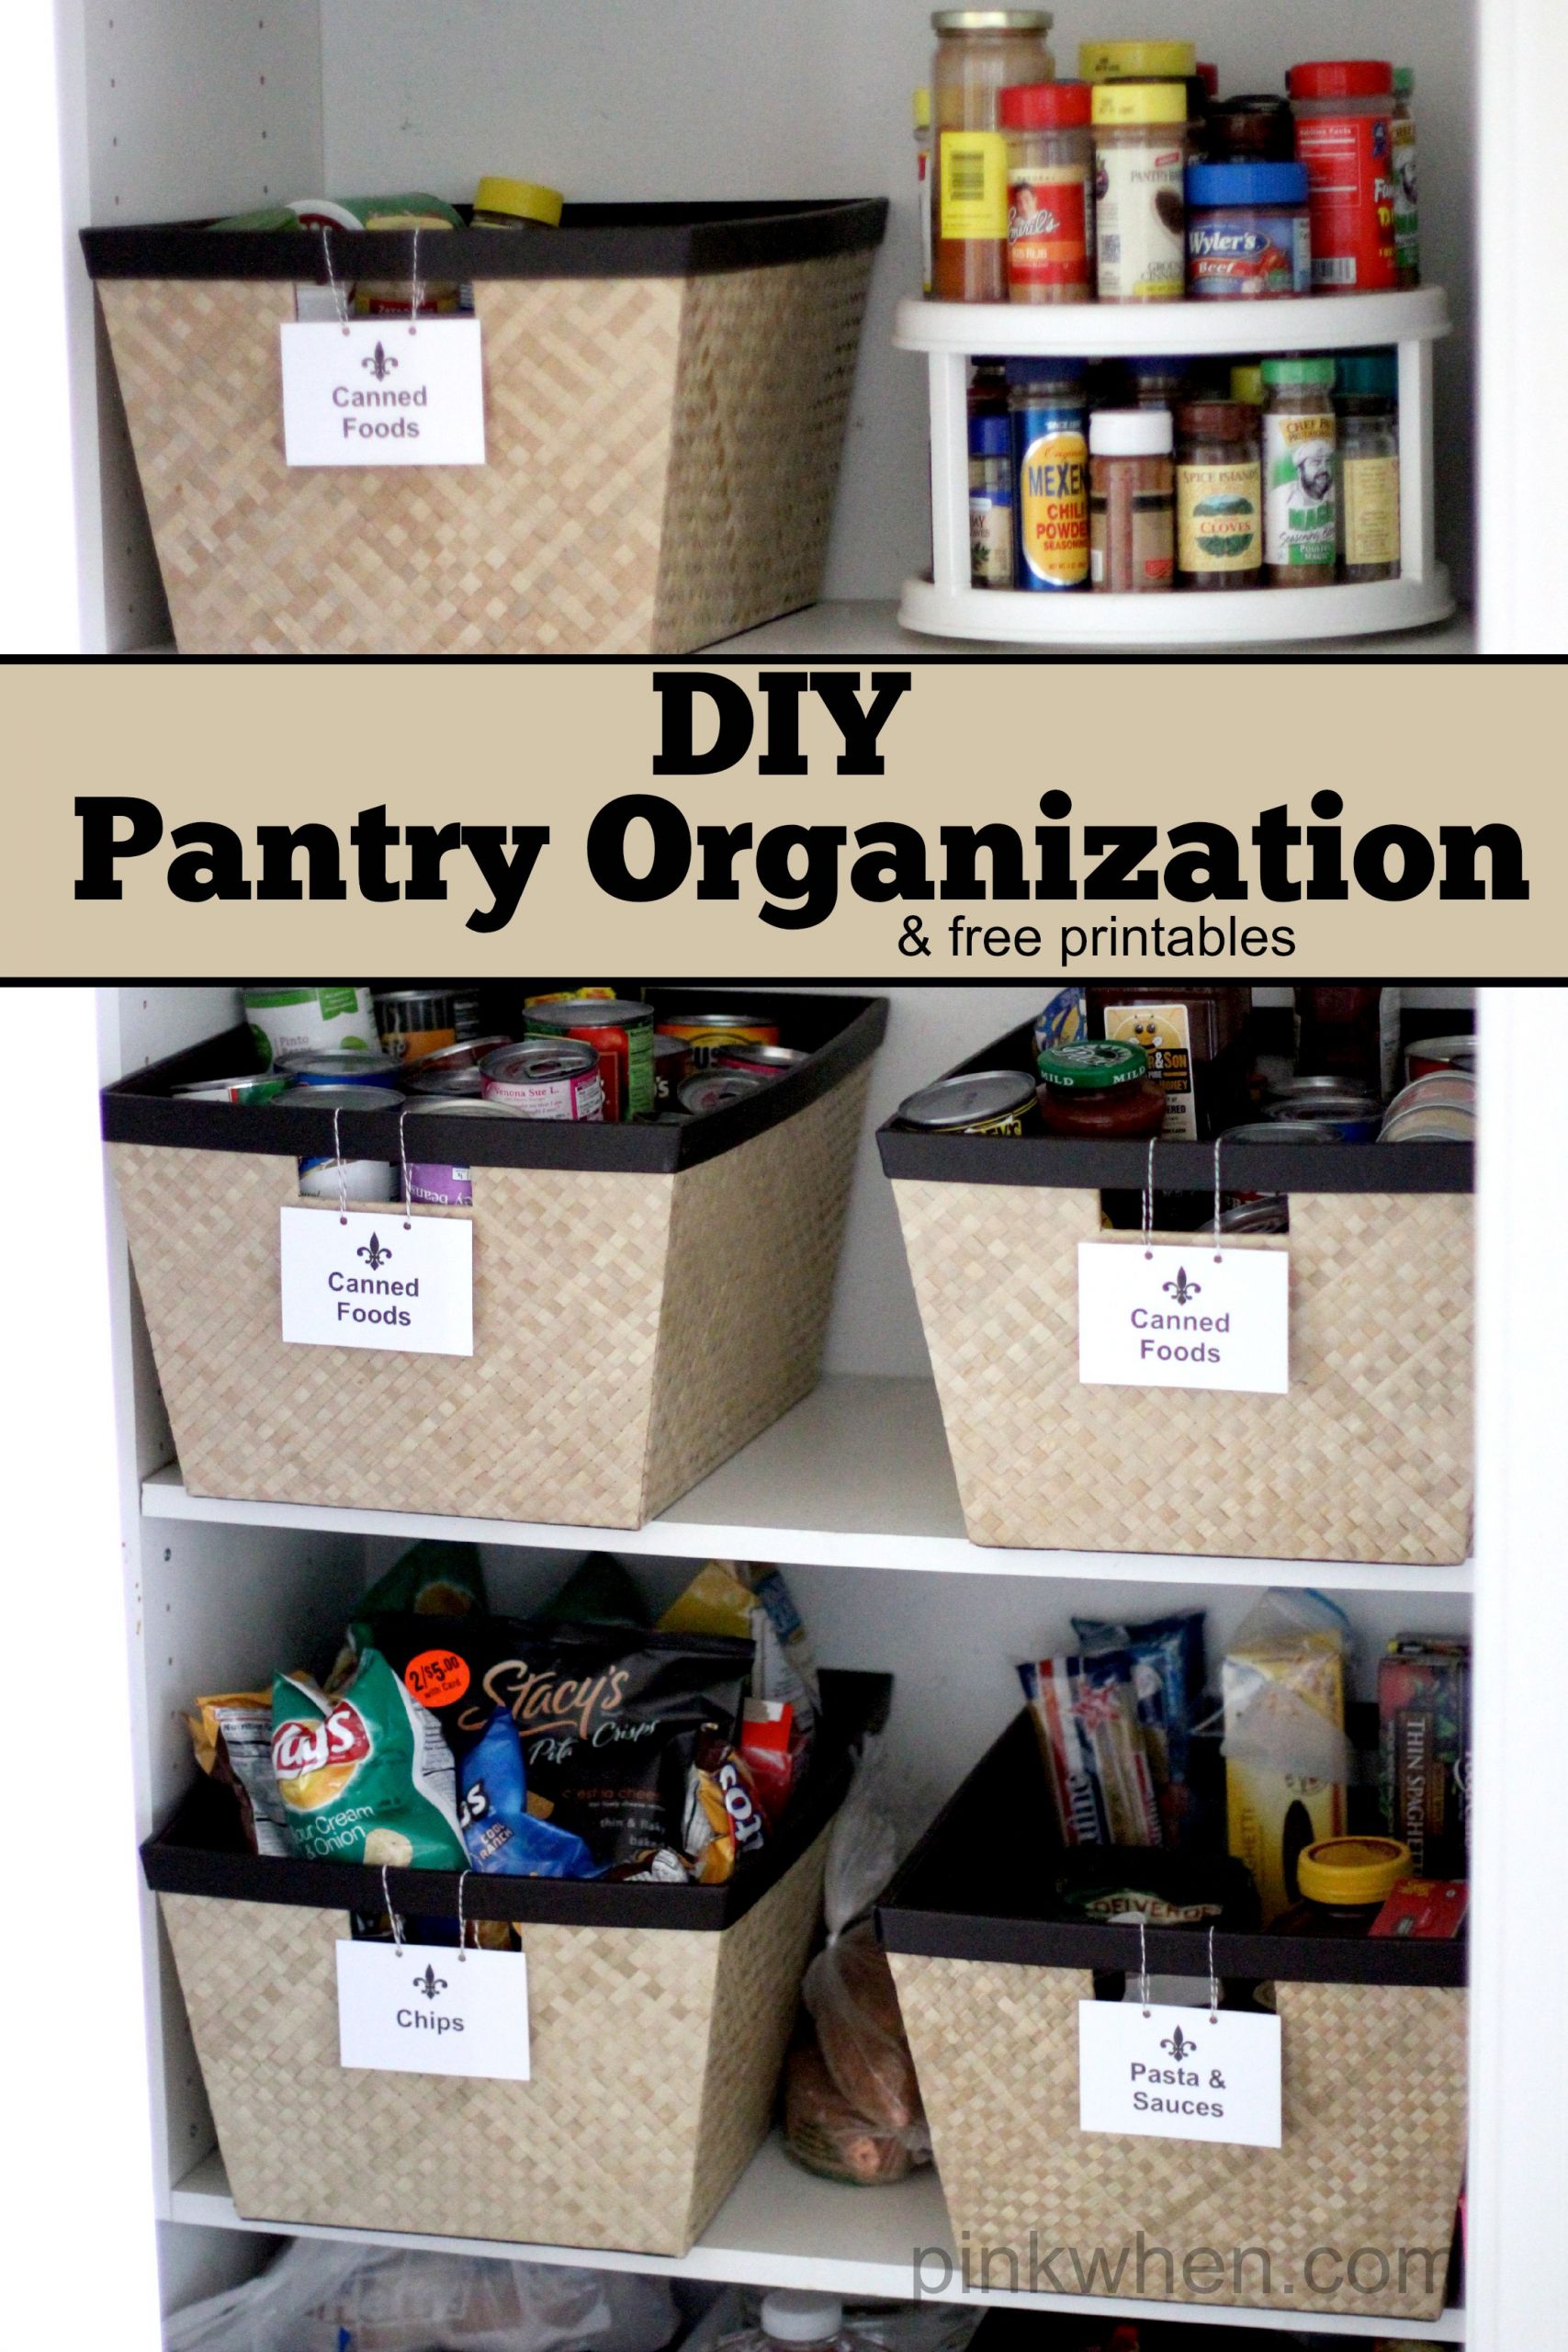 DIY Kitchen Organizer Ideas
 Pantry Organization Page 2 of 2 Blooming Homestead